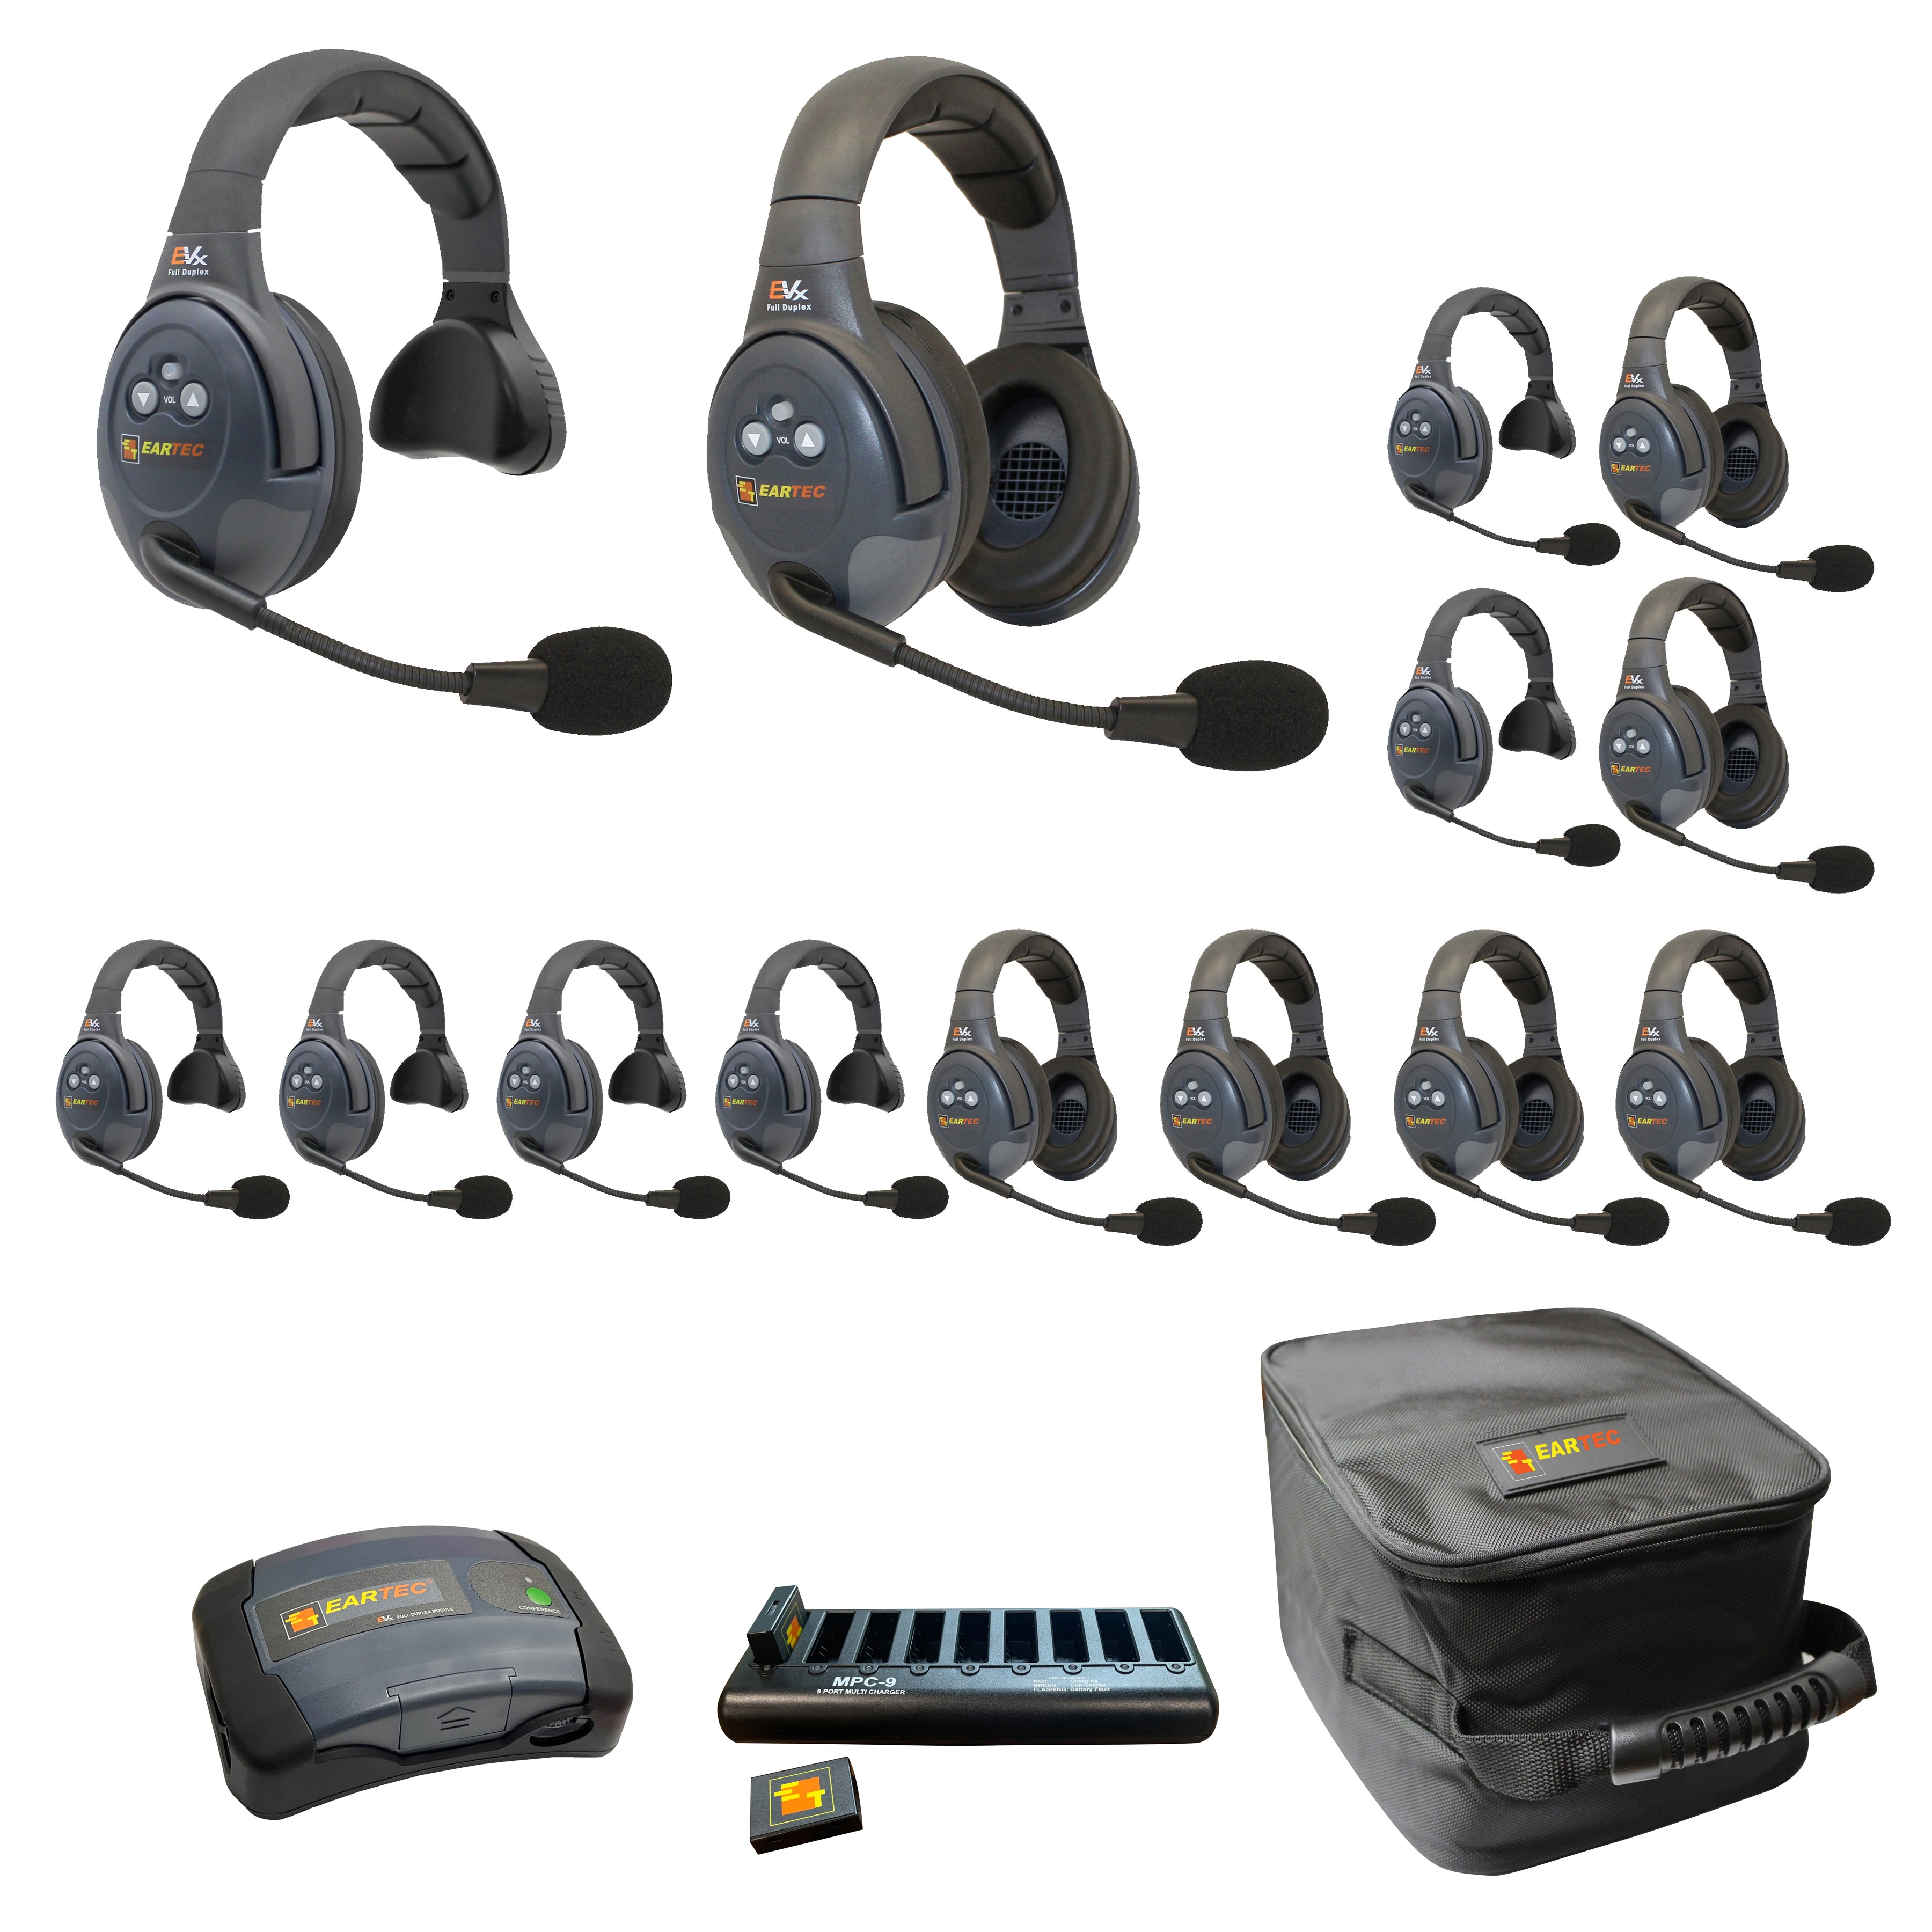 Eartec 1- EVADE C-MOD 2- EVADE Single-Ear Main Headset 7- EVADE Single-Ear Remote Headset 7- EVADE Double-Ear Remote Headsets 2- 9-Port Charger w/ Adapter 2- Extra large Soft Padded Case 14 X Lithium-Polymer Batteries EVX1477-CM